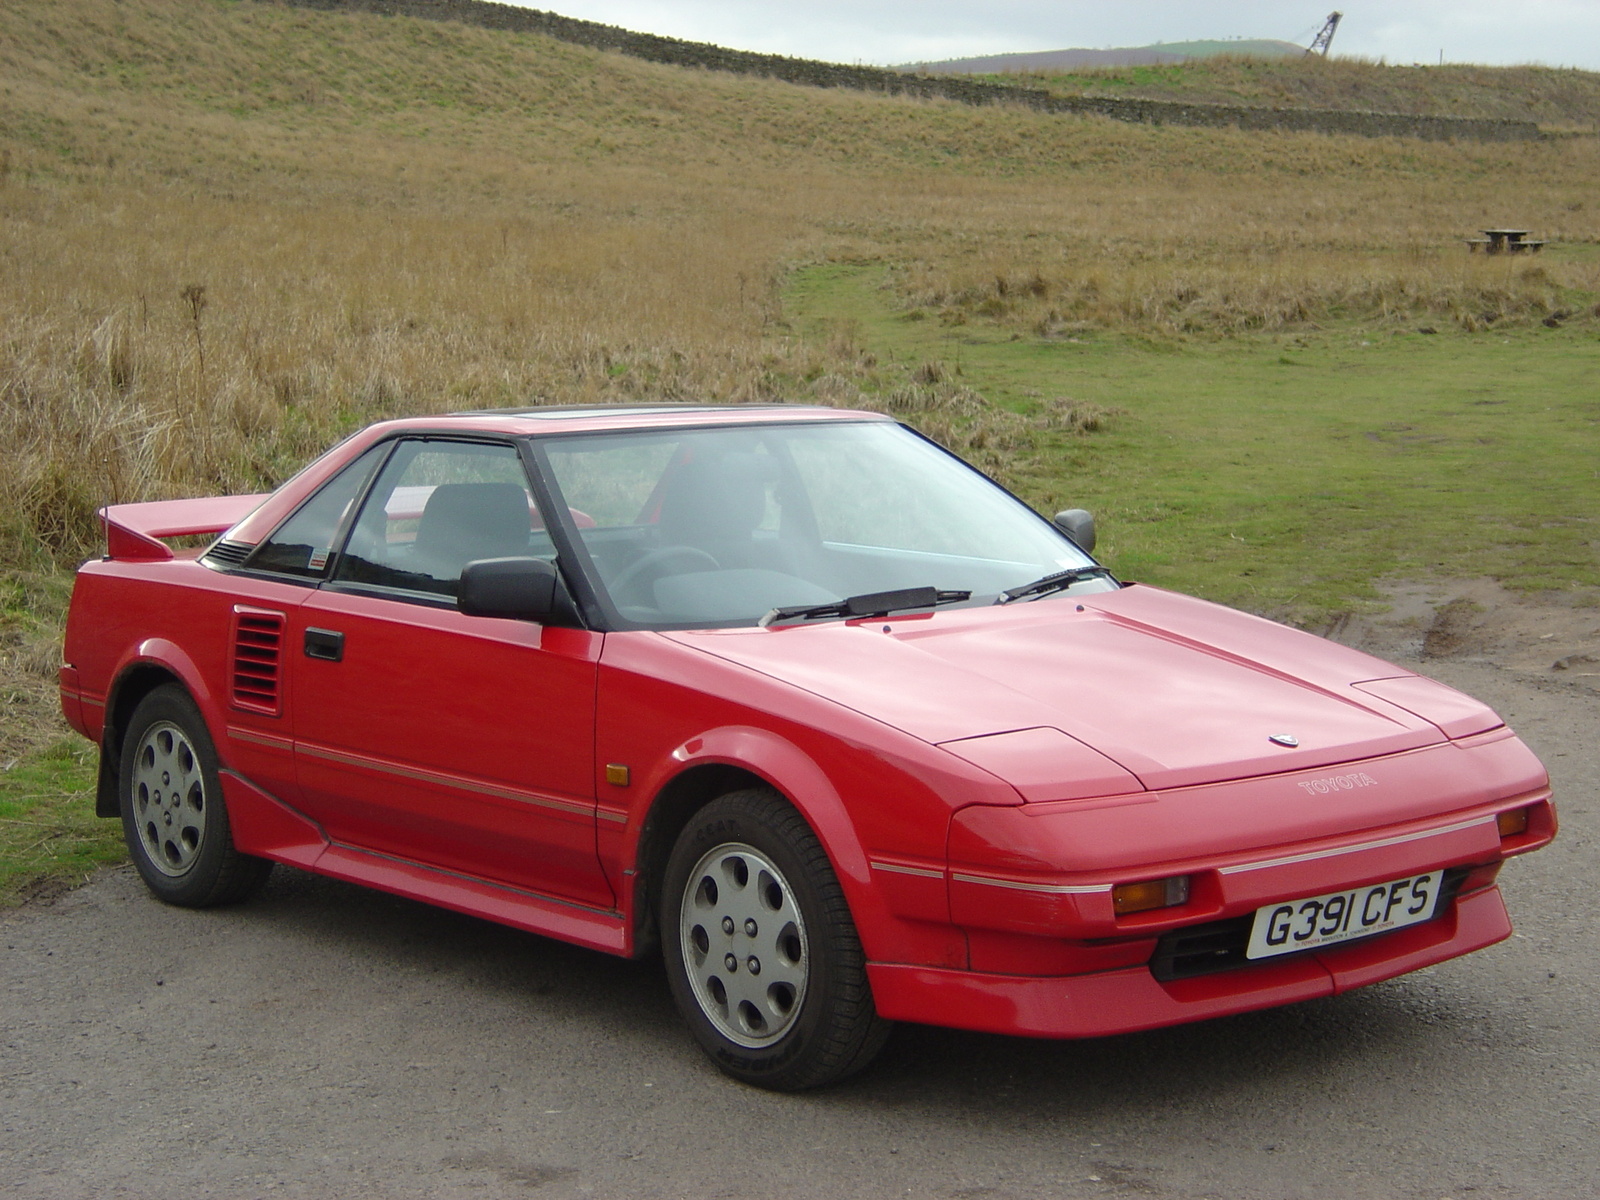 The 1989 Toyota MR2 is developed in the production facility of Toyota.